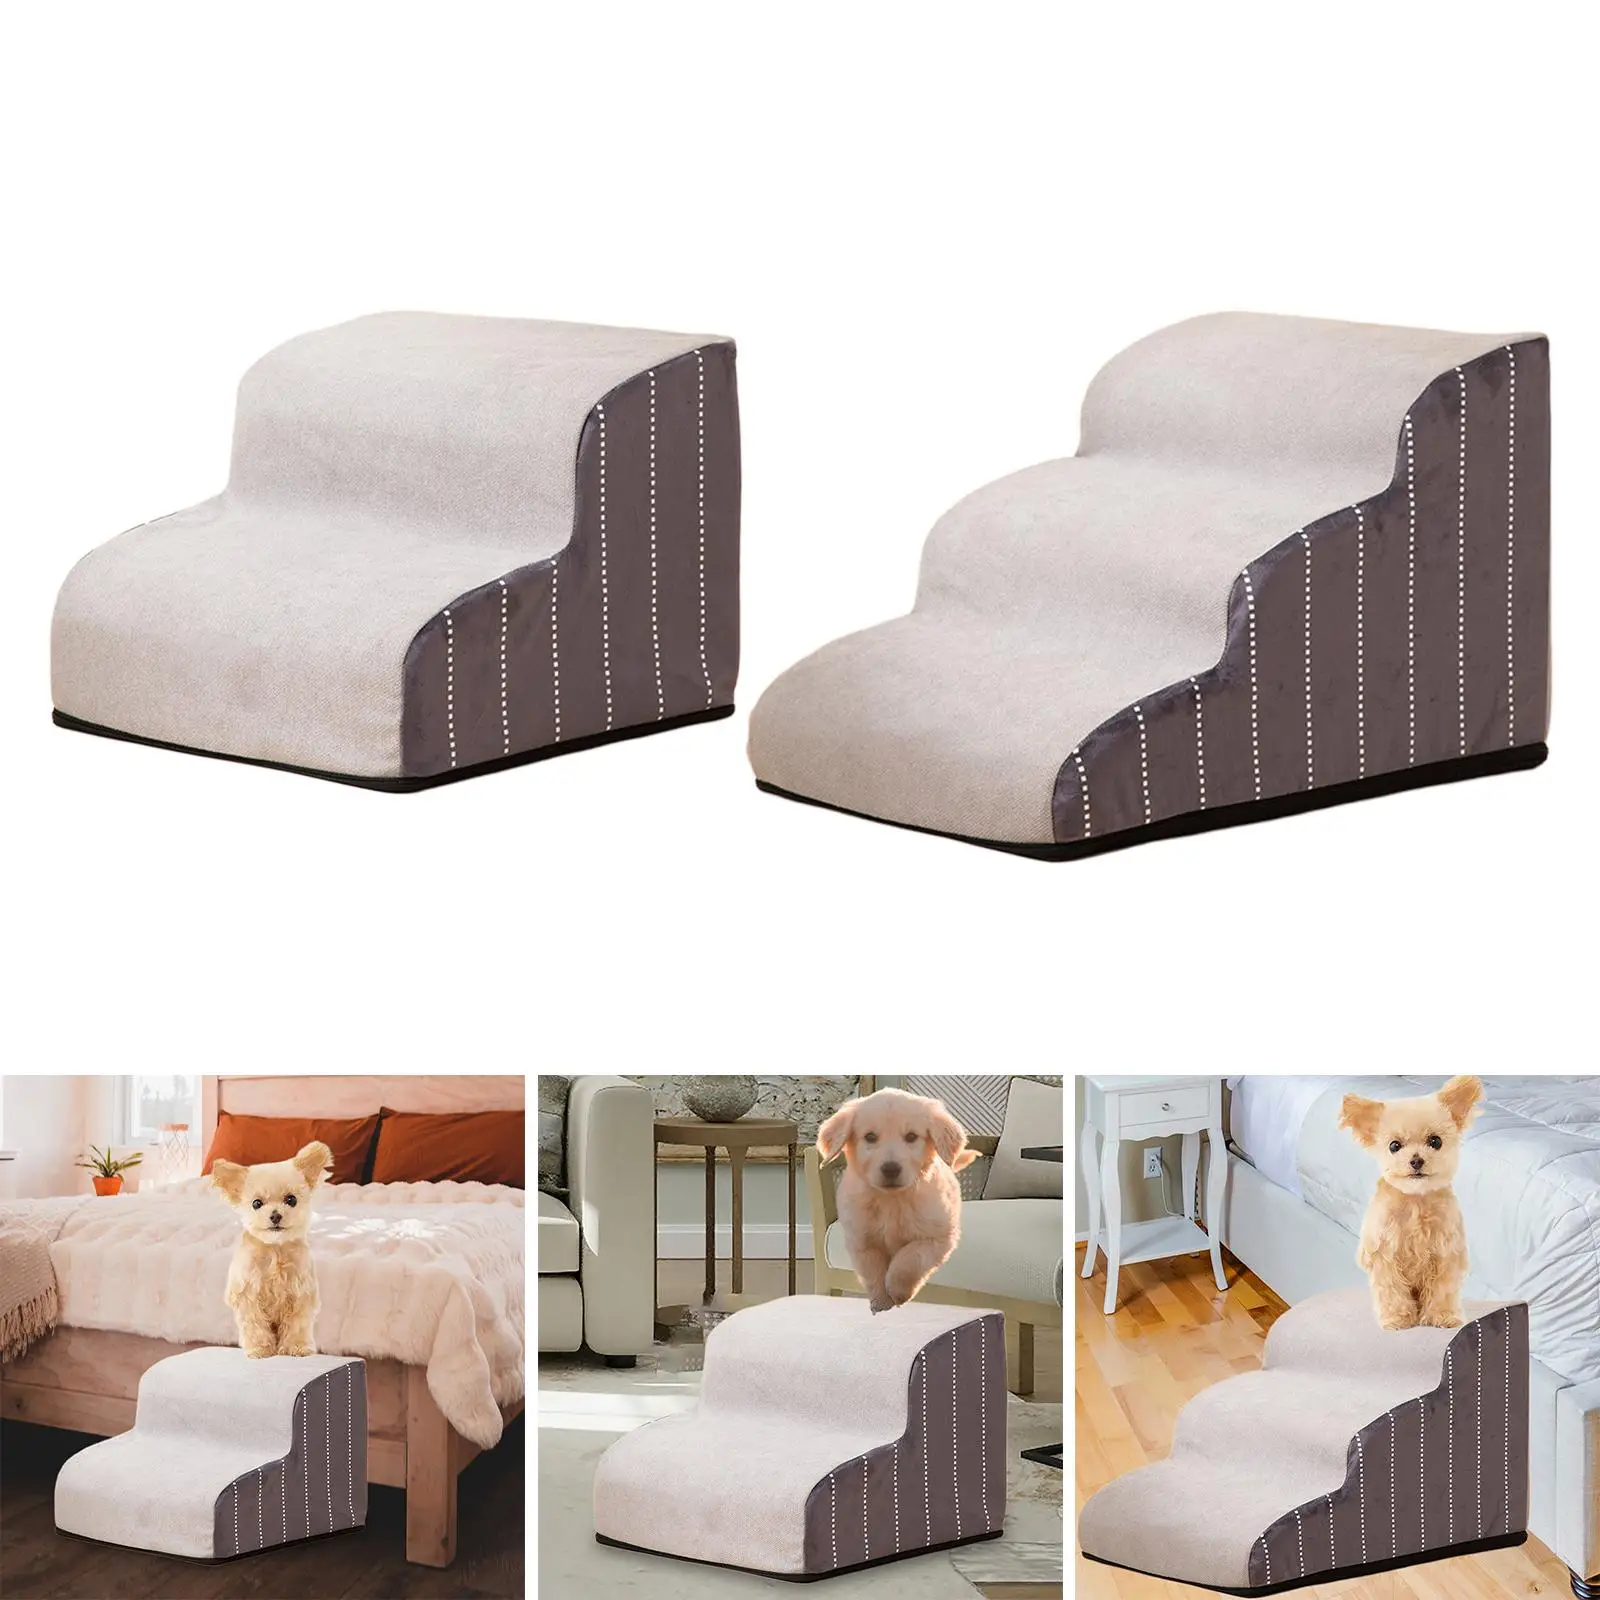 Portable Dog Steps Stair with Detachable Cover Ladder Ramp Climbing Breathable Wide Cat Pet Supplies for Cats Indoor Bed